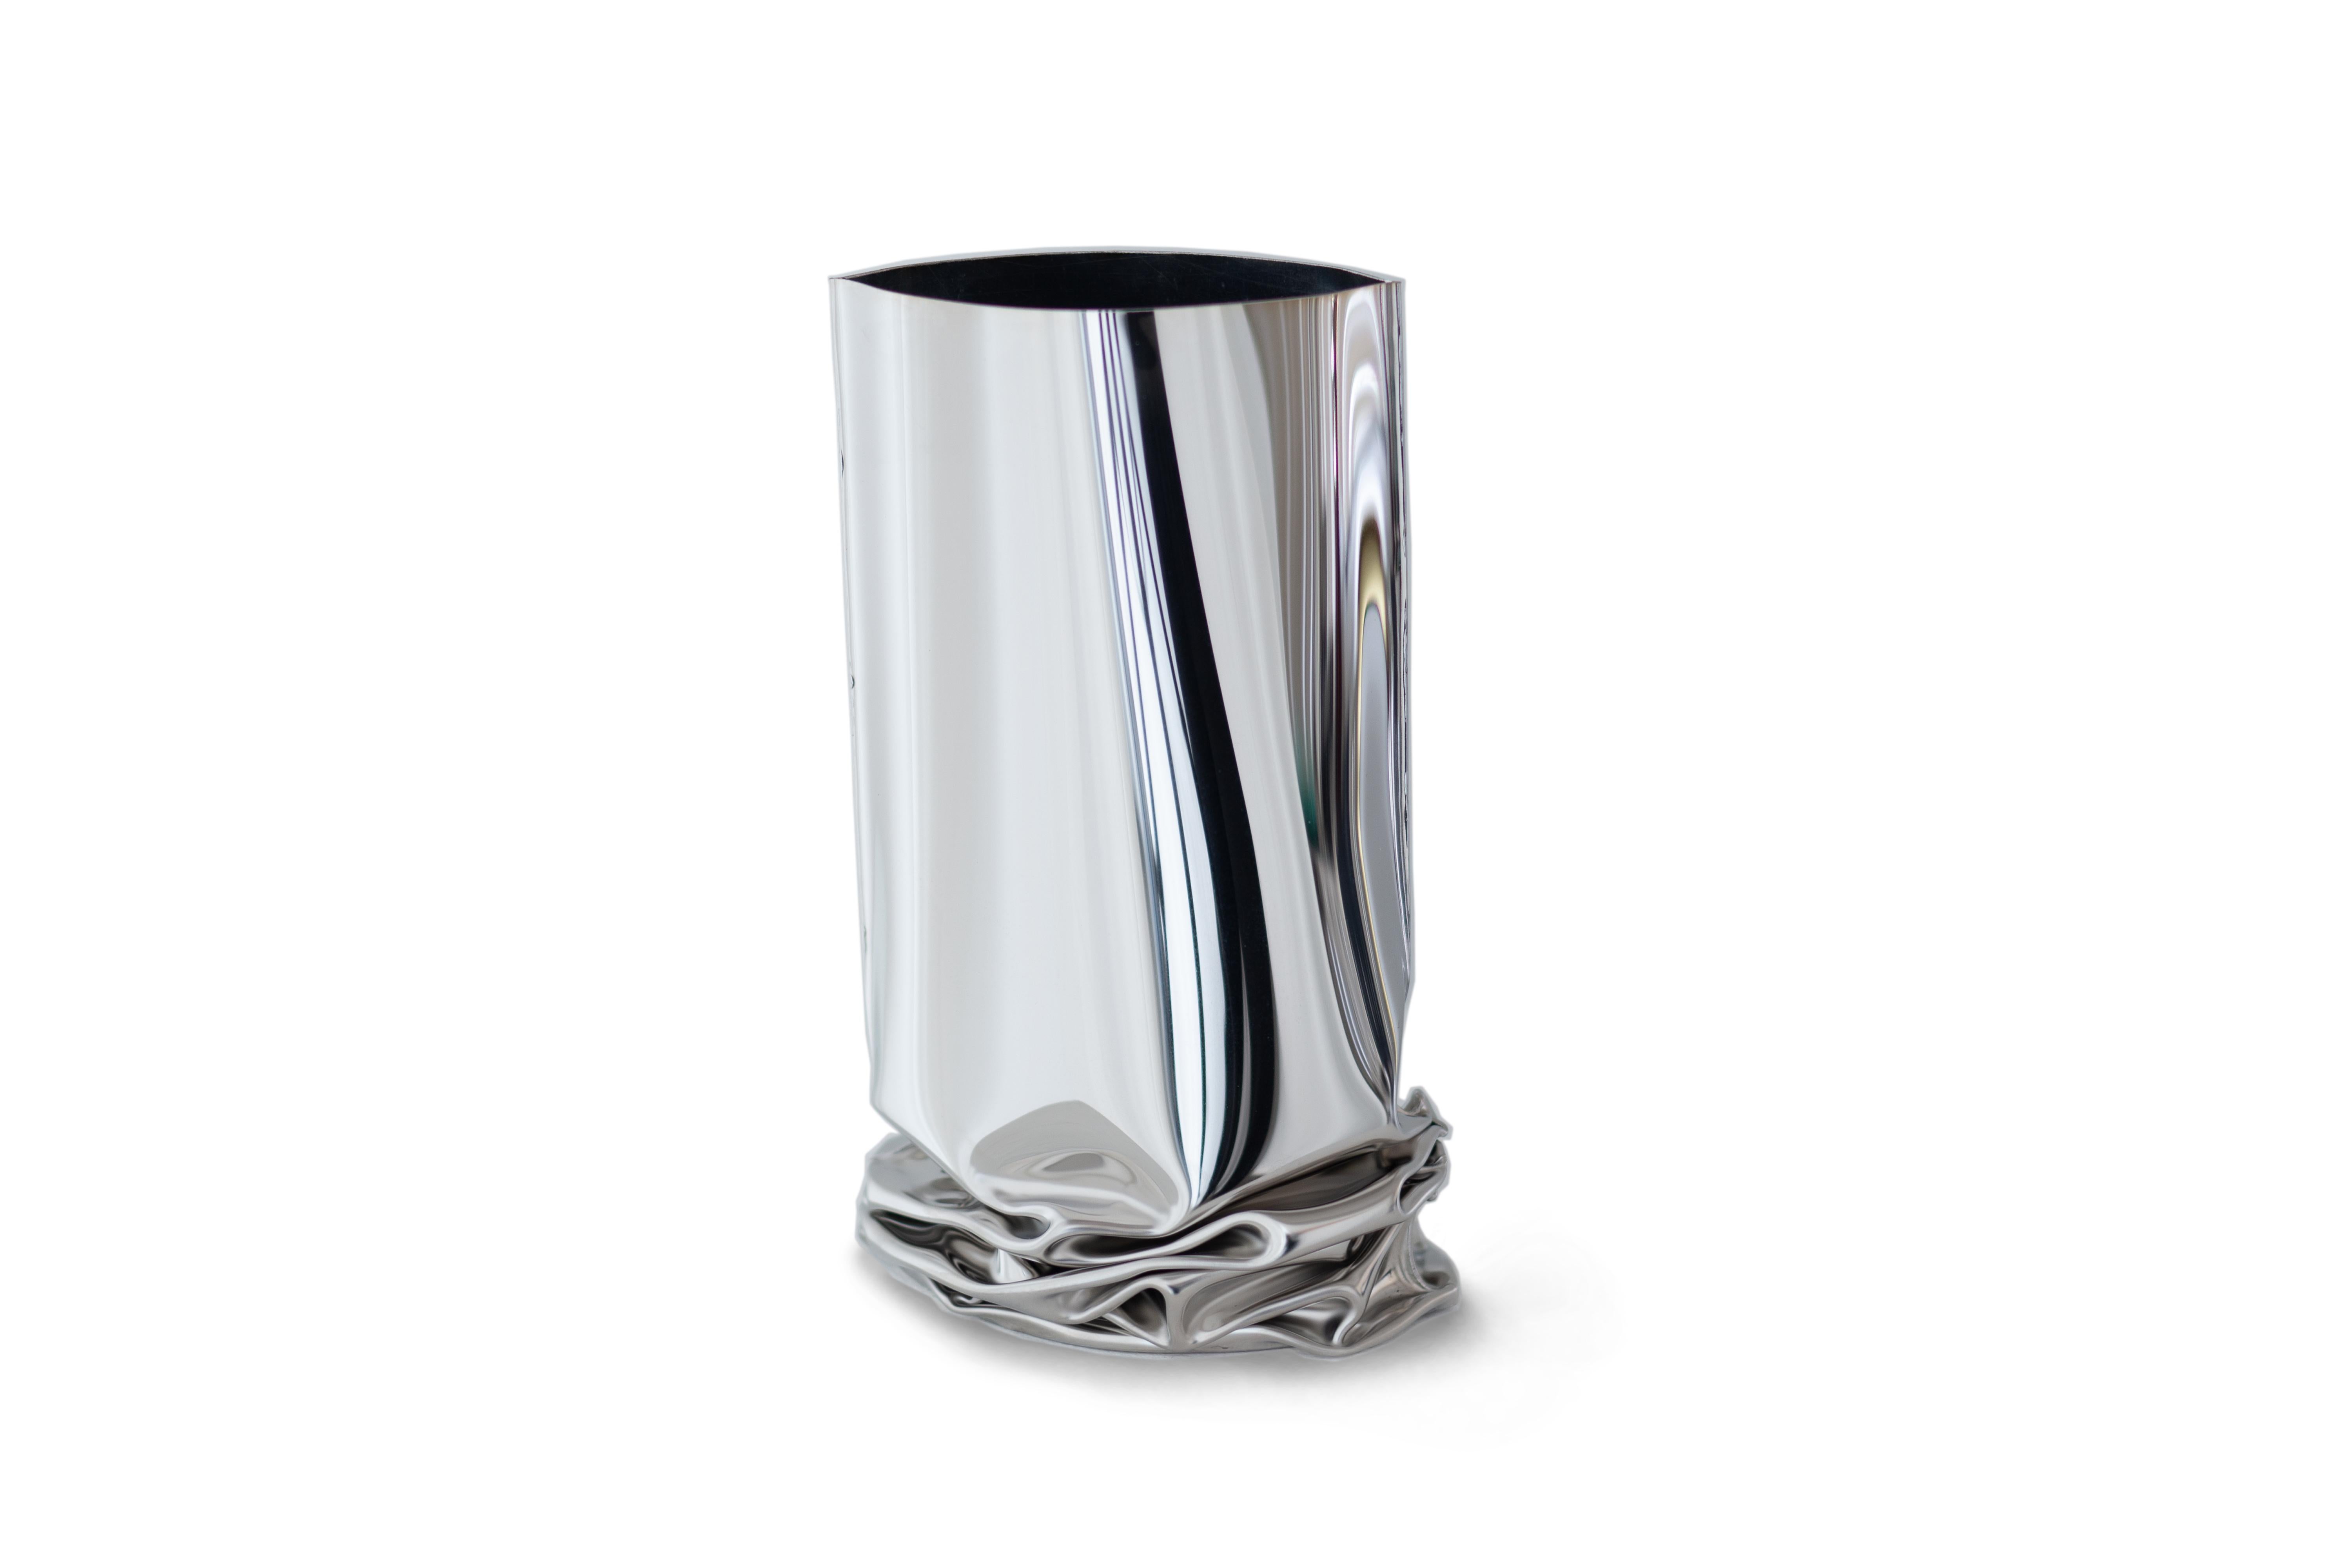 Polished Contemporary Vase, 'Crash Vase' by Zieta, Small, Stainless Steel For Sale